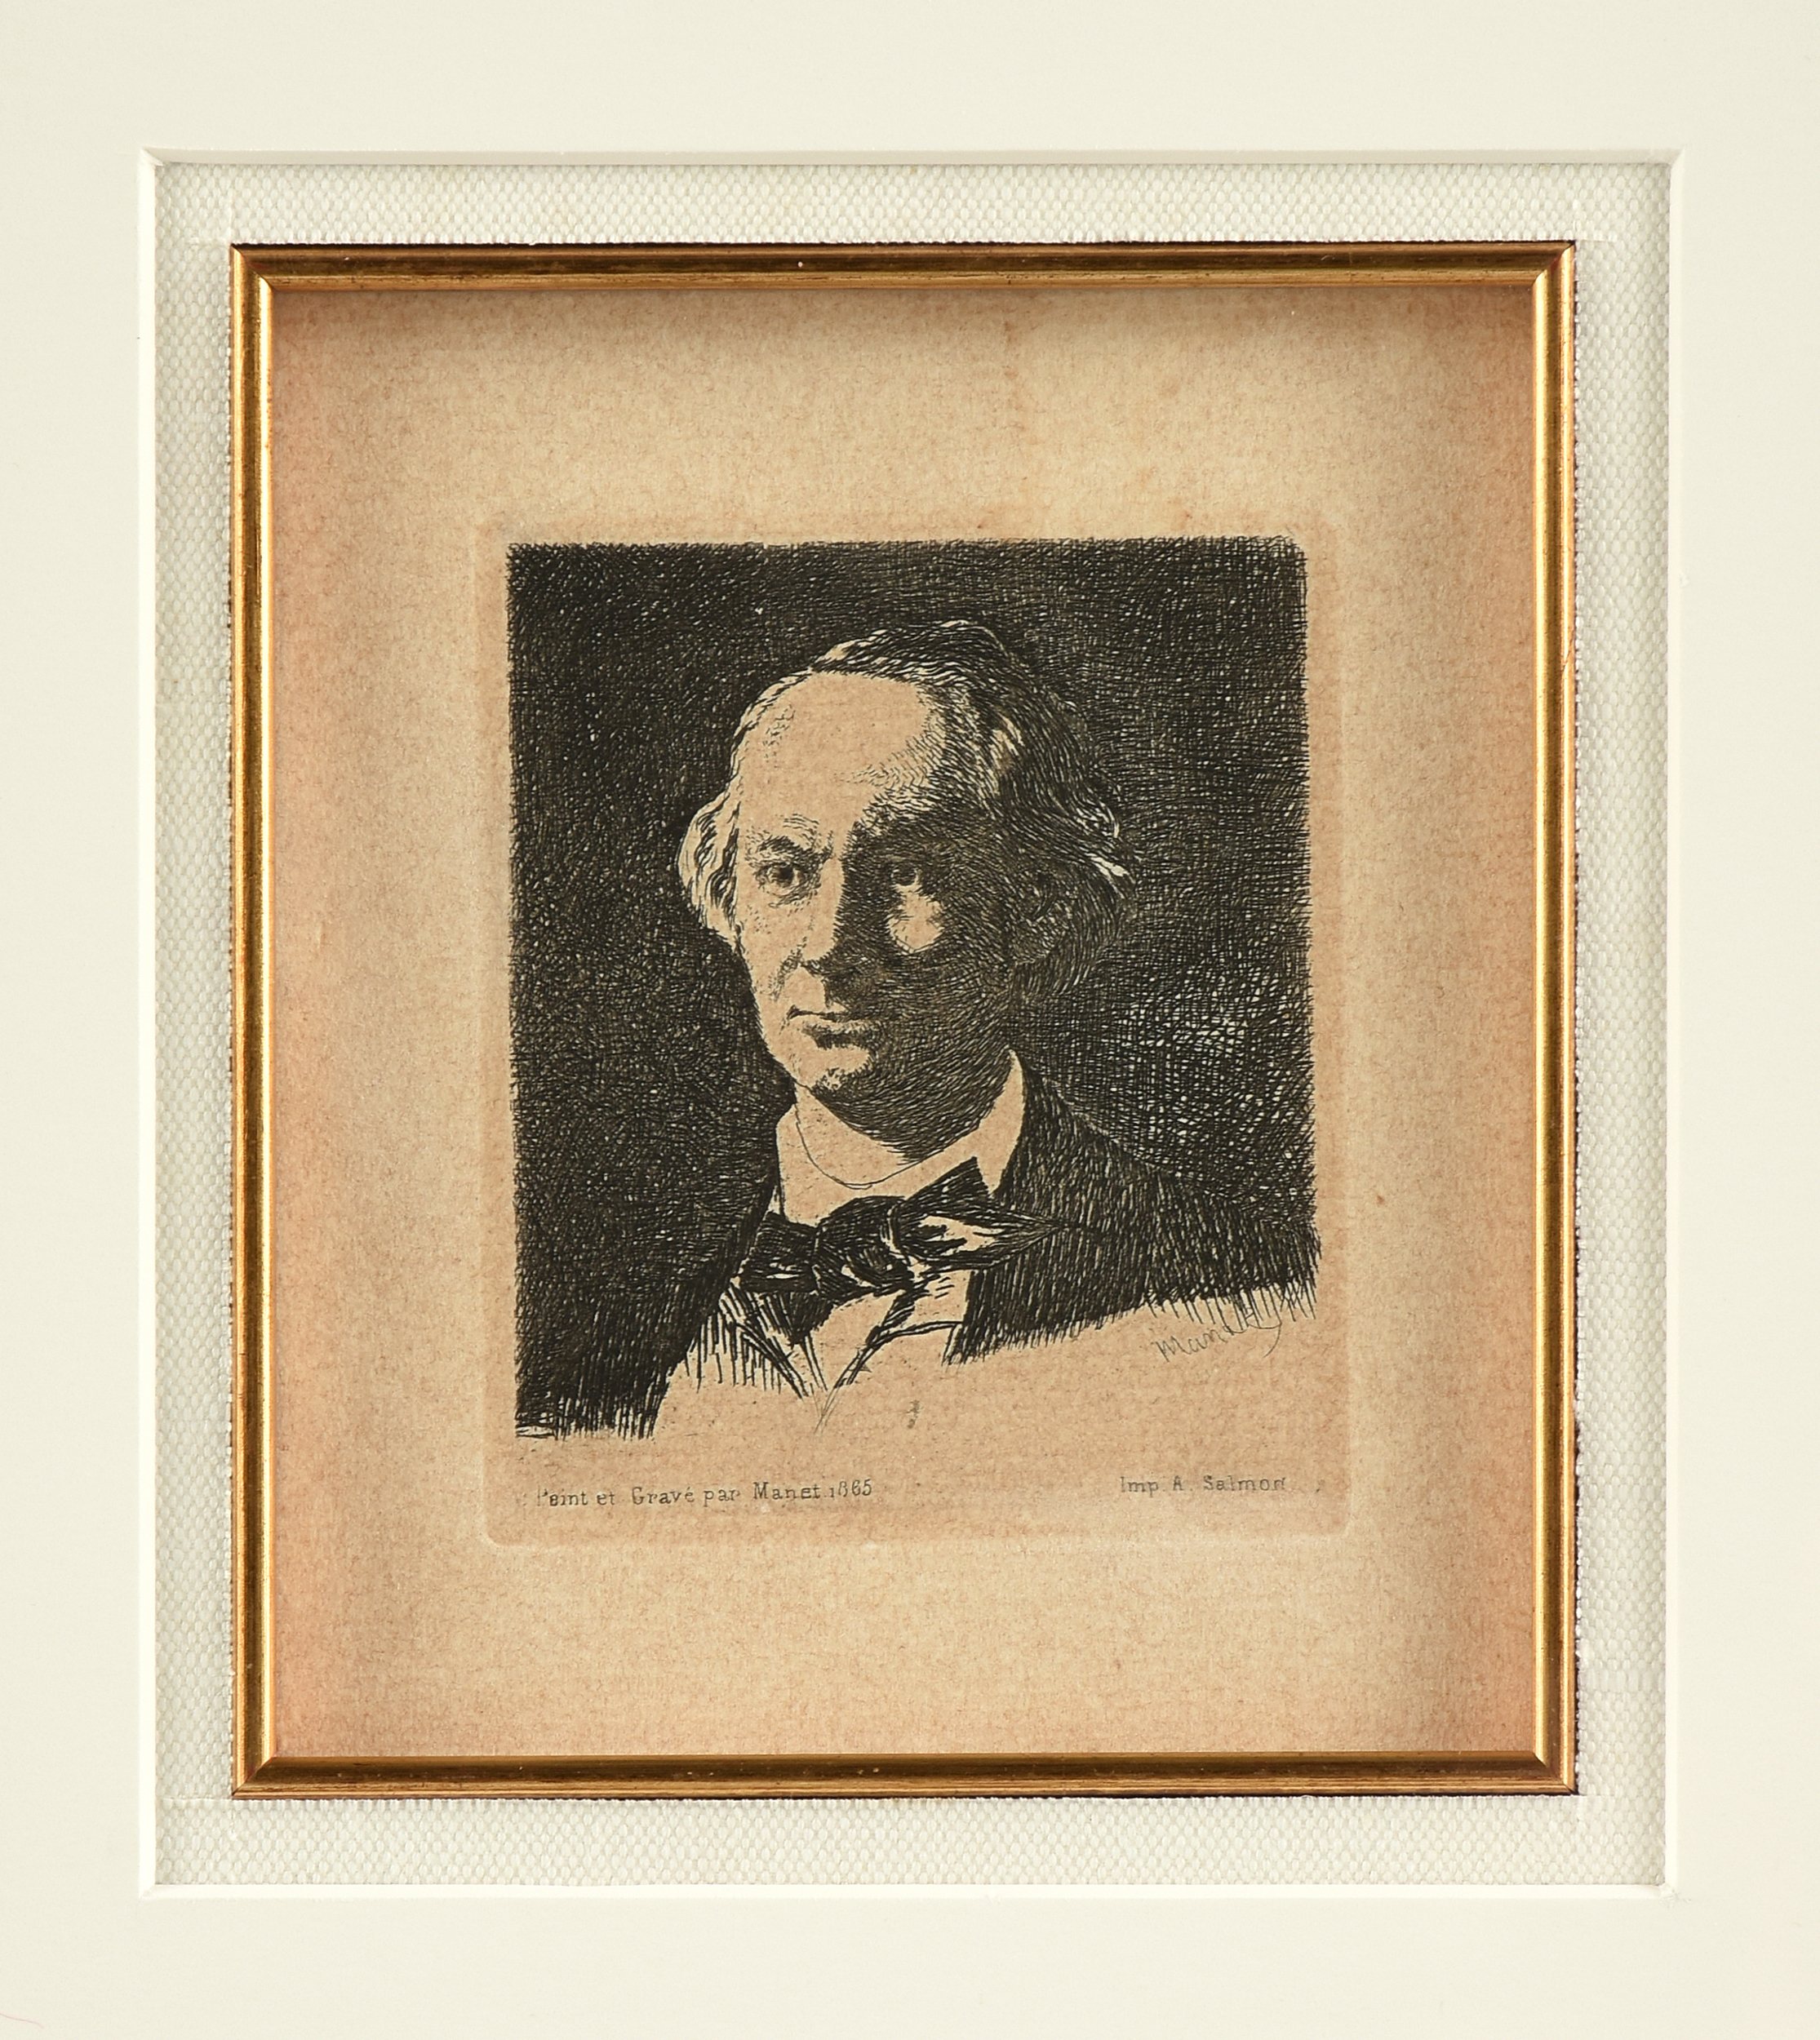 ÉDOUARD MANET (French 1832-1883) A PRINT, "Baudelaire en Face," 1868, etching on wove paper, signed